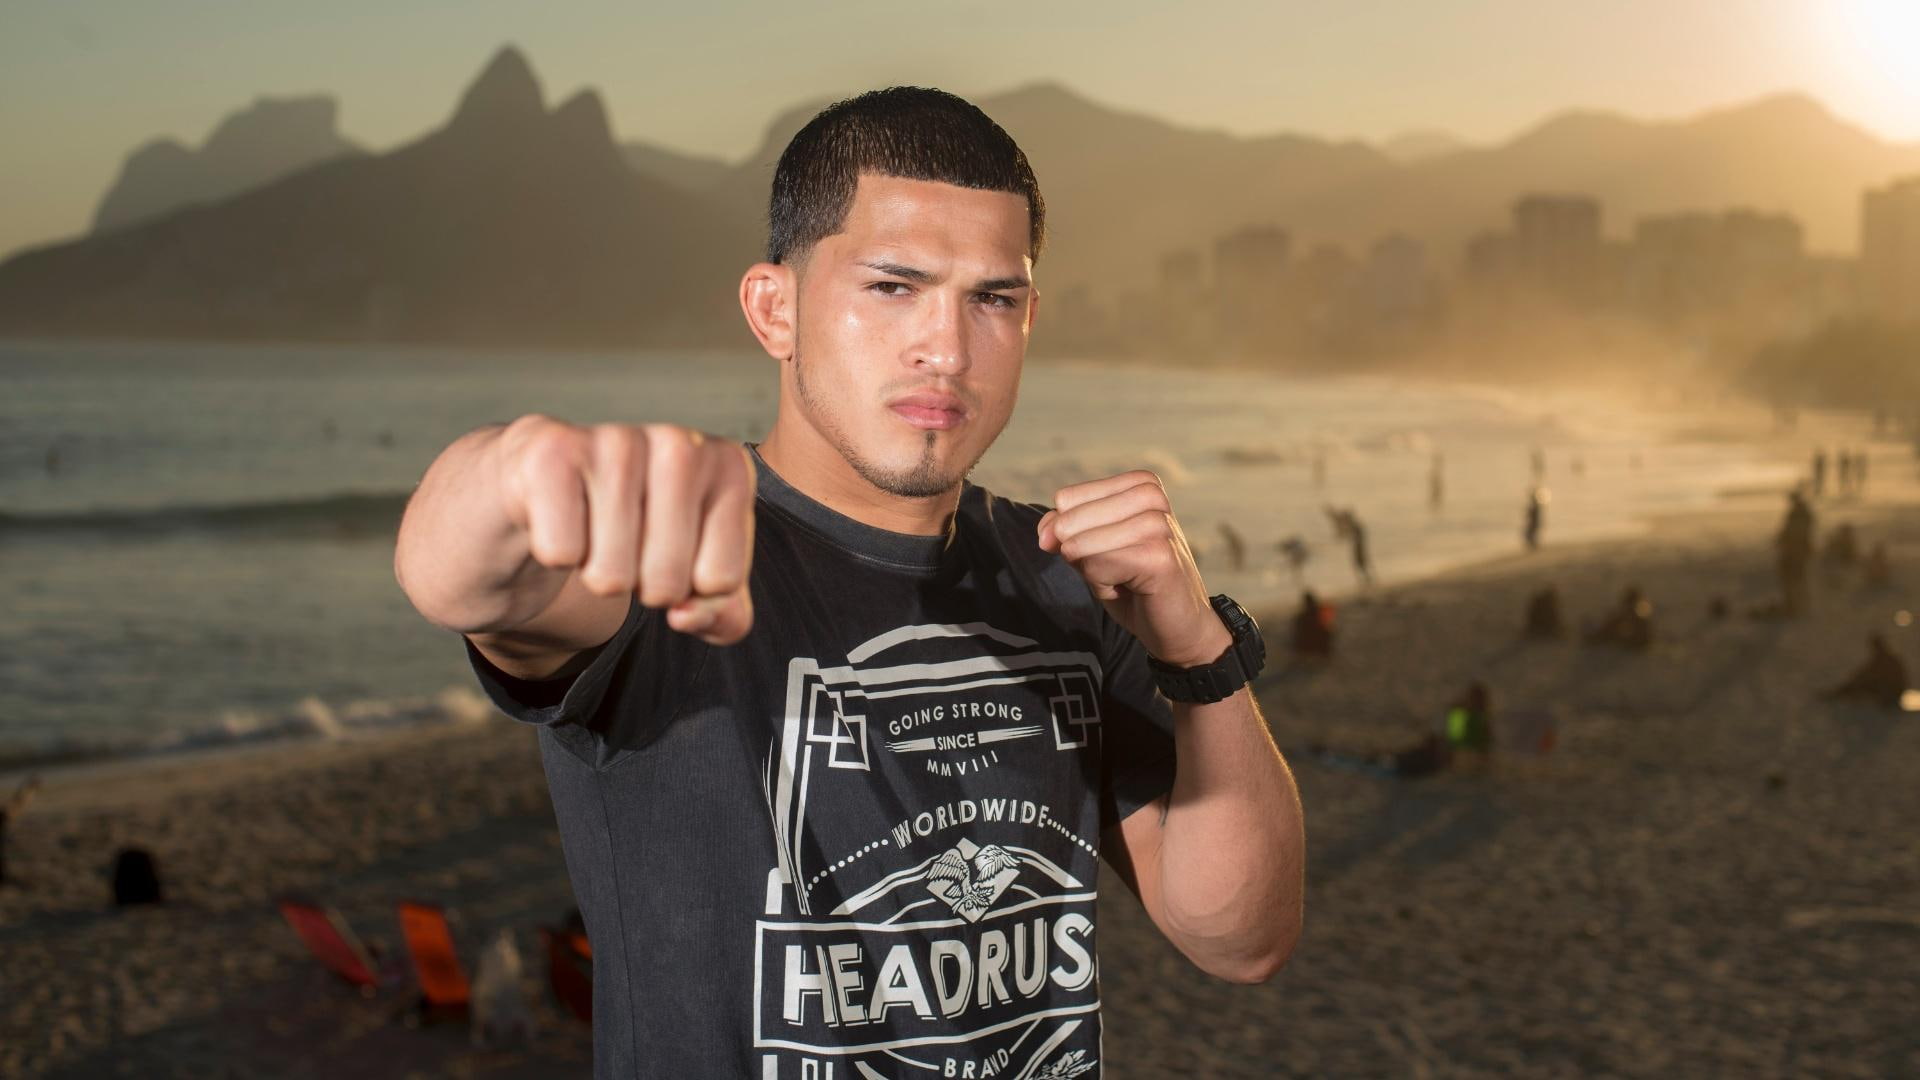 anthony pettis, american professional athlete, mixed martial arts fighter, ufc champion